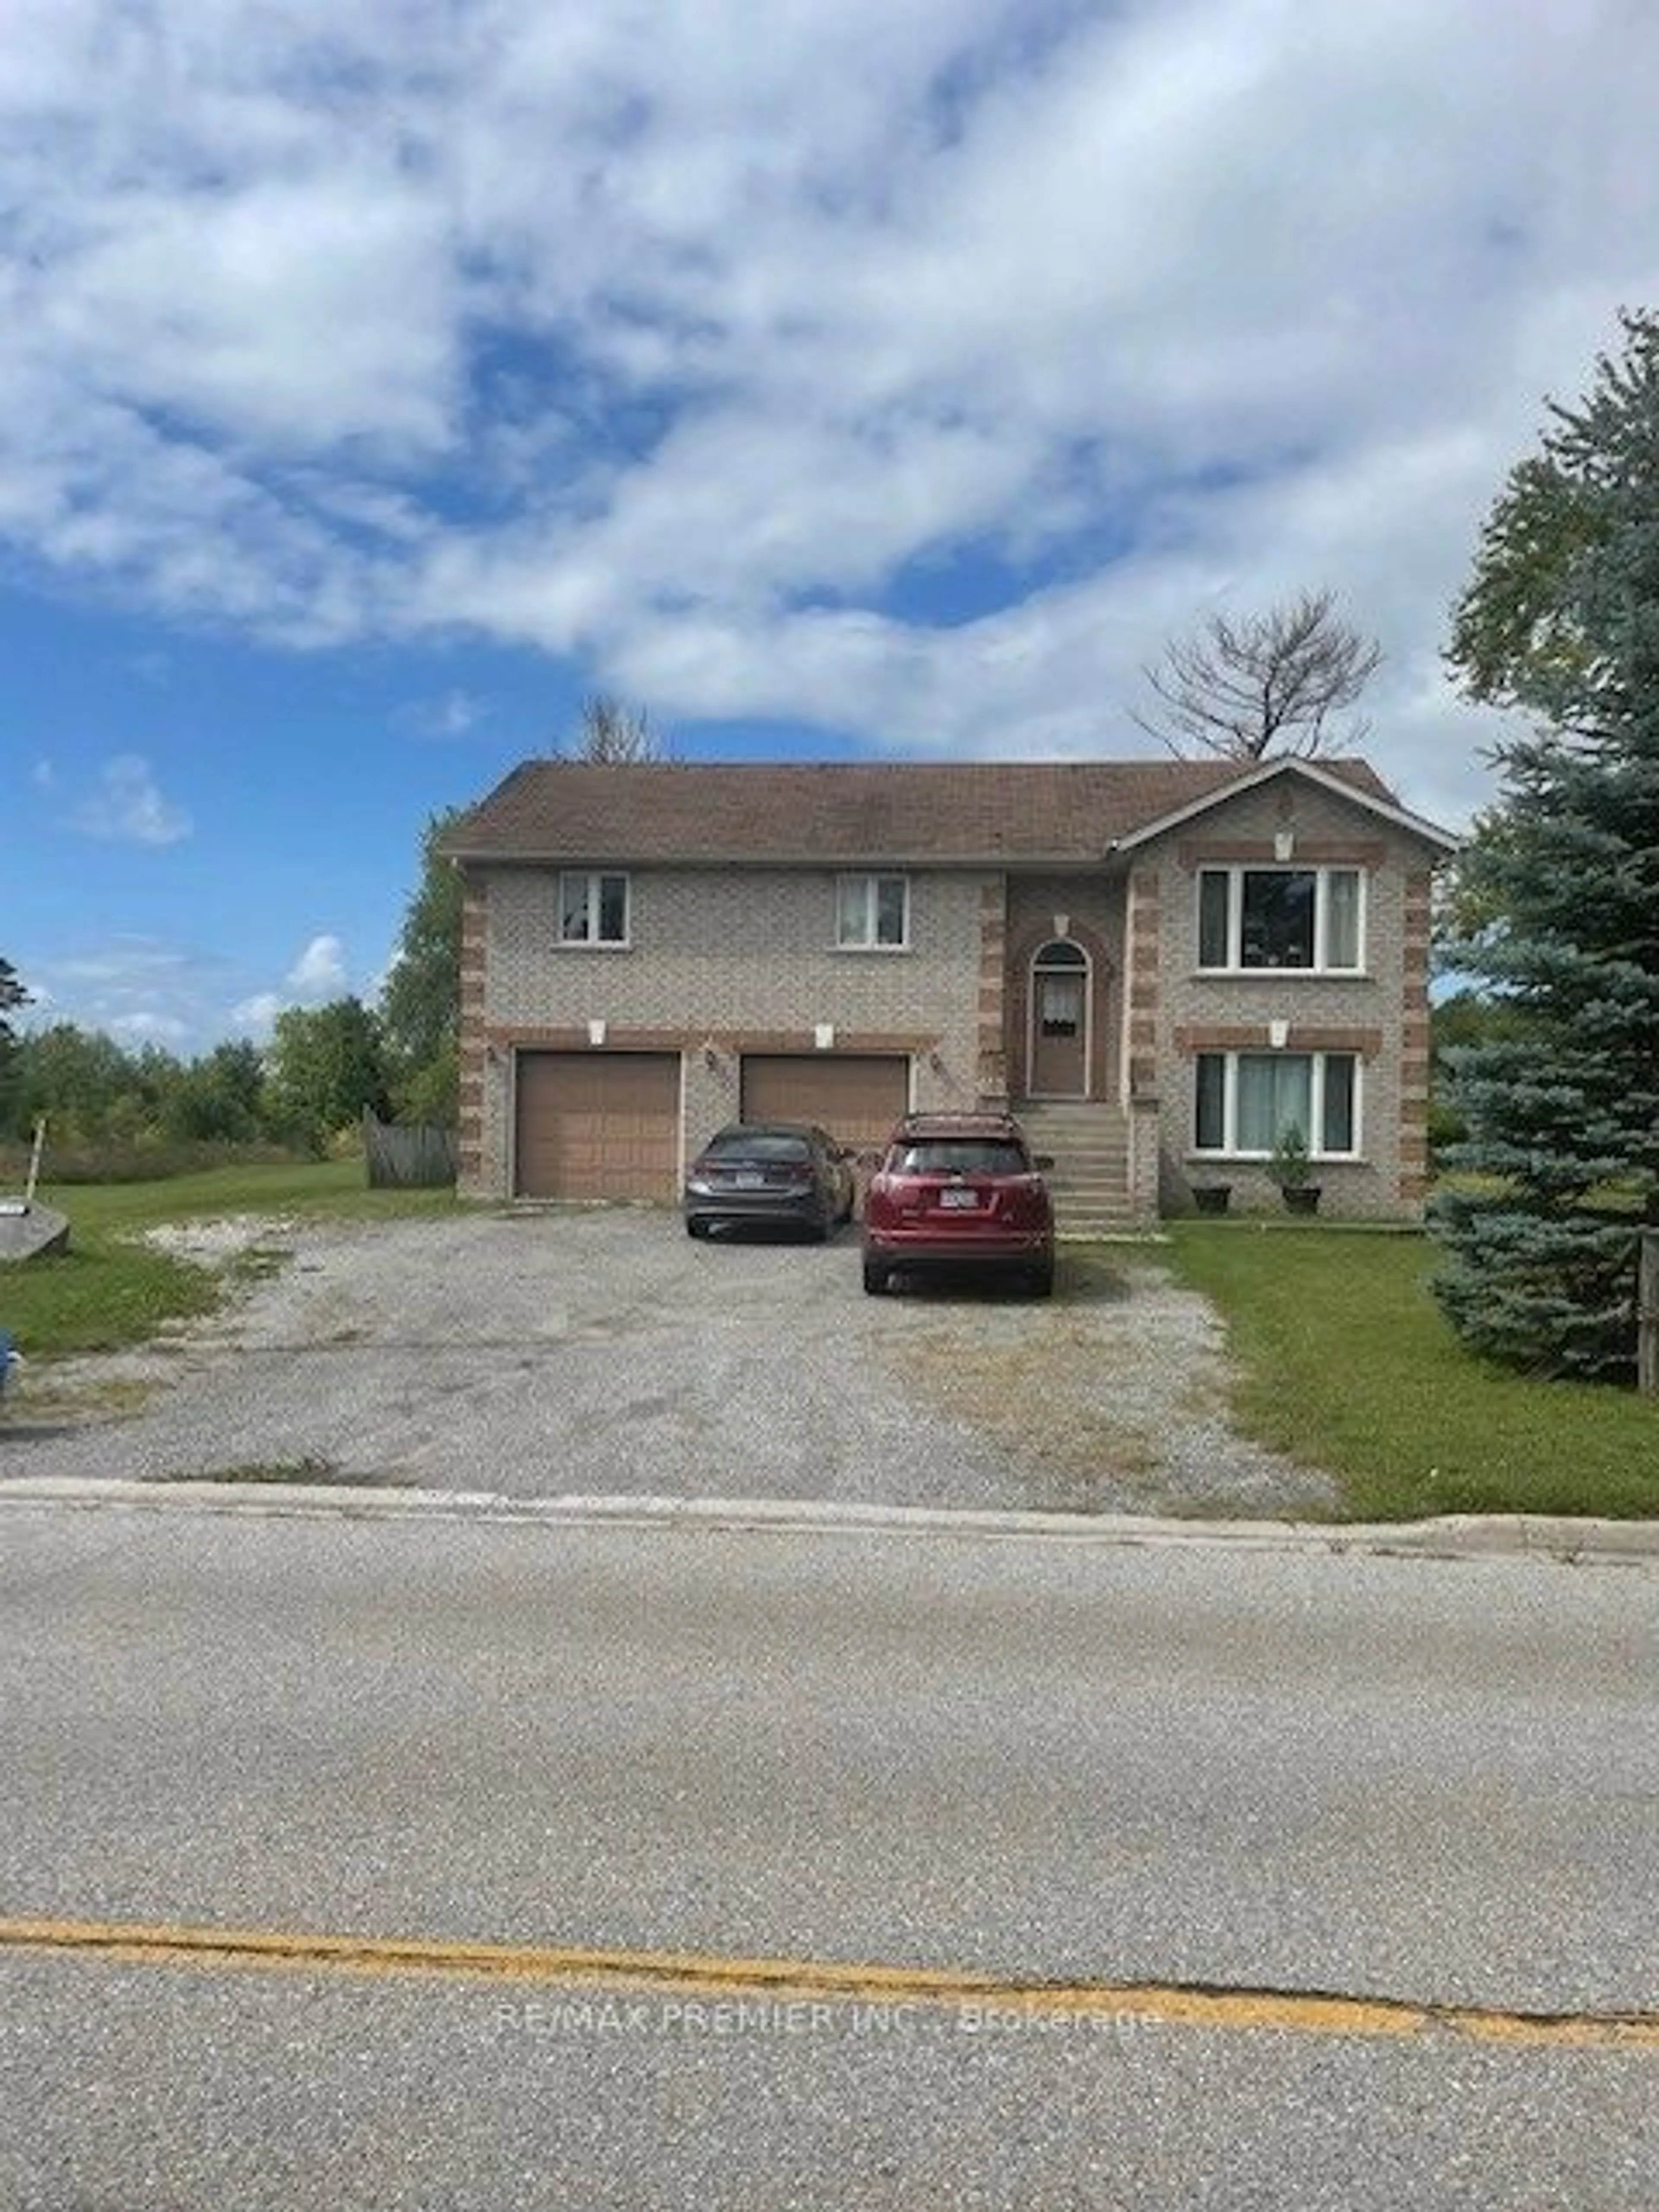 Frontside or backside of a home for 108-128 Park Ave, East Gwillimbury Ontario L9N 1H5